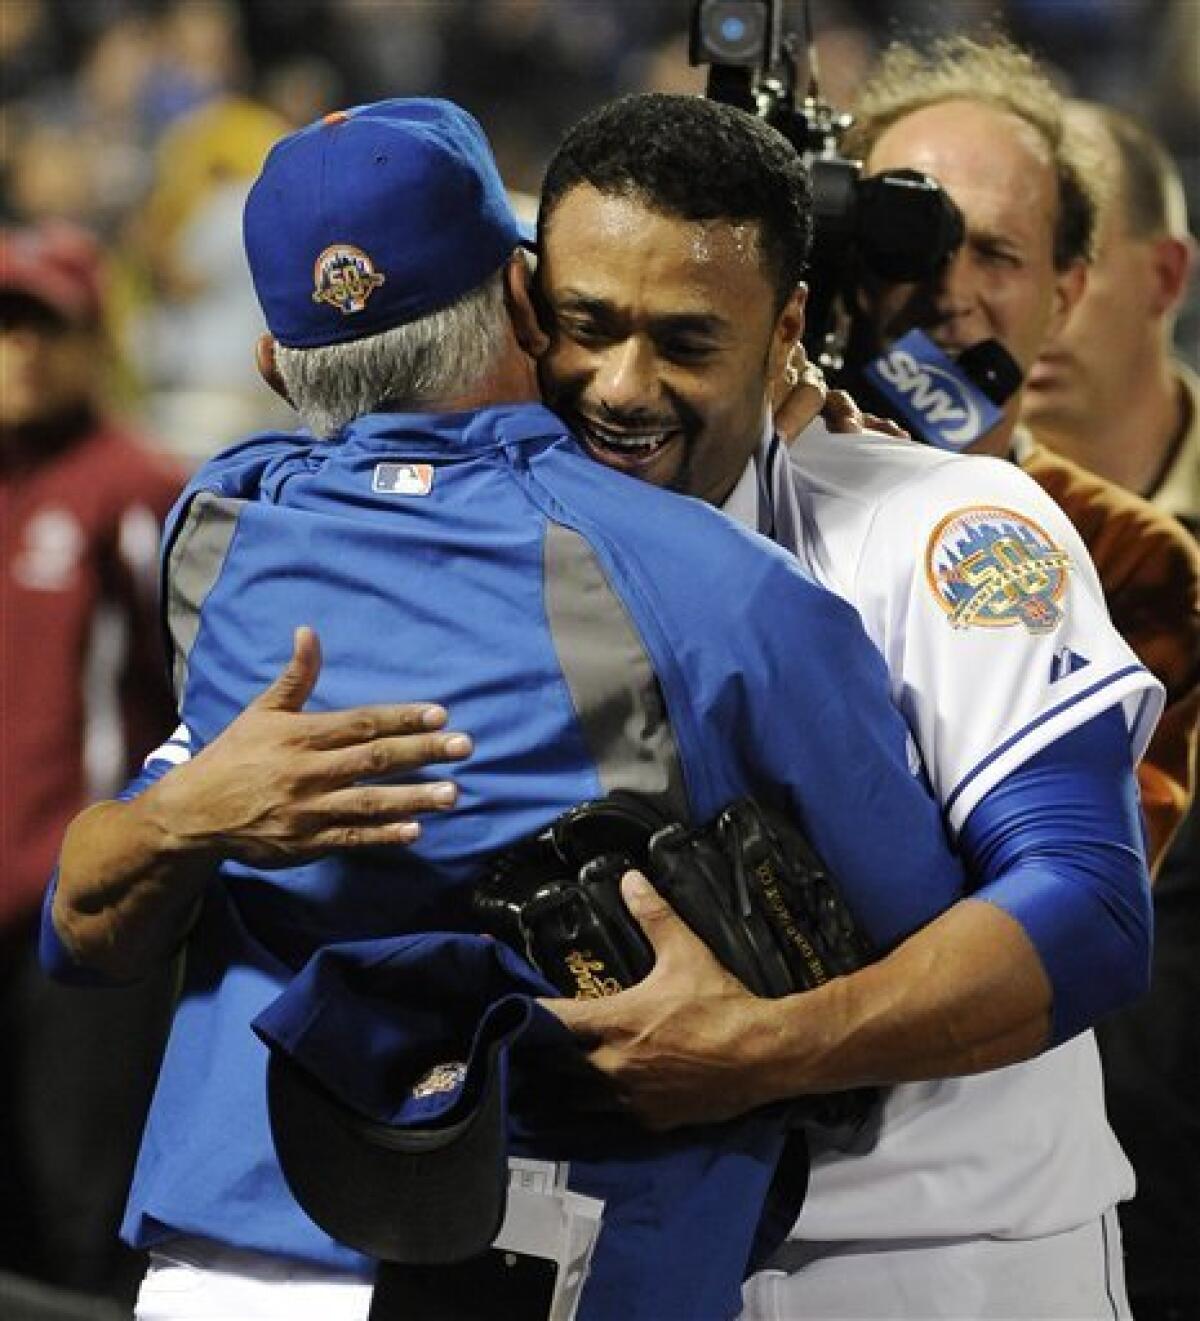 Johan Santana will be remembered for throwing first no-hitter in